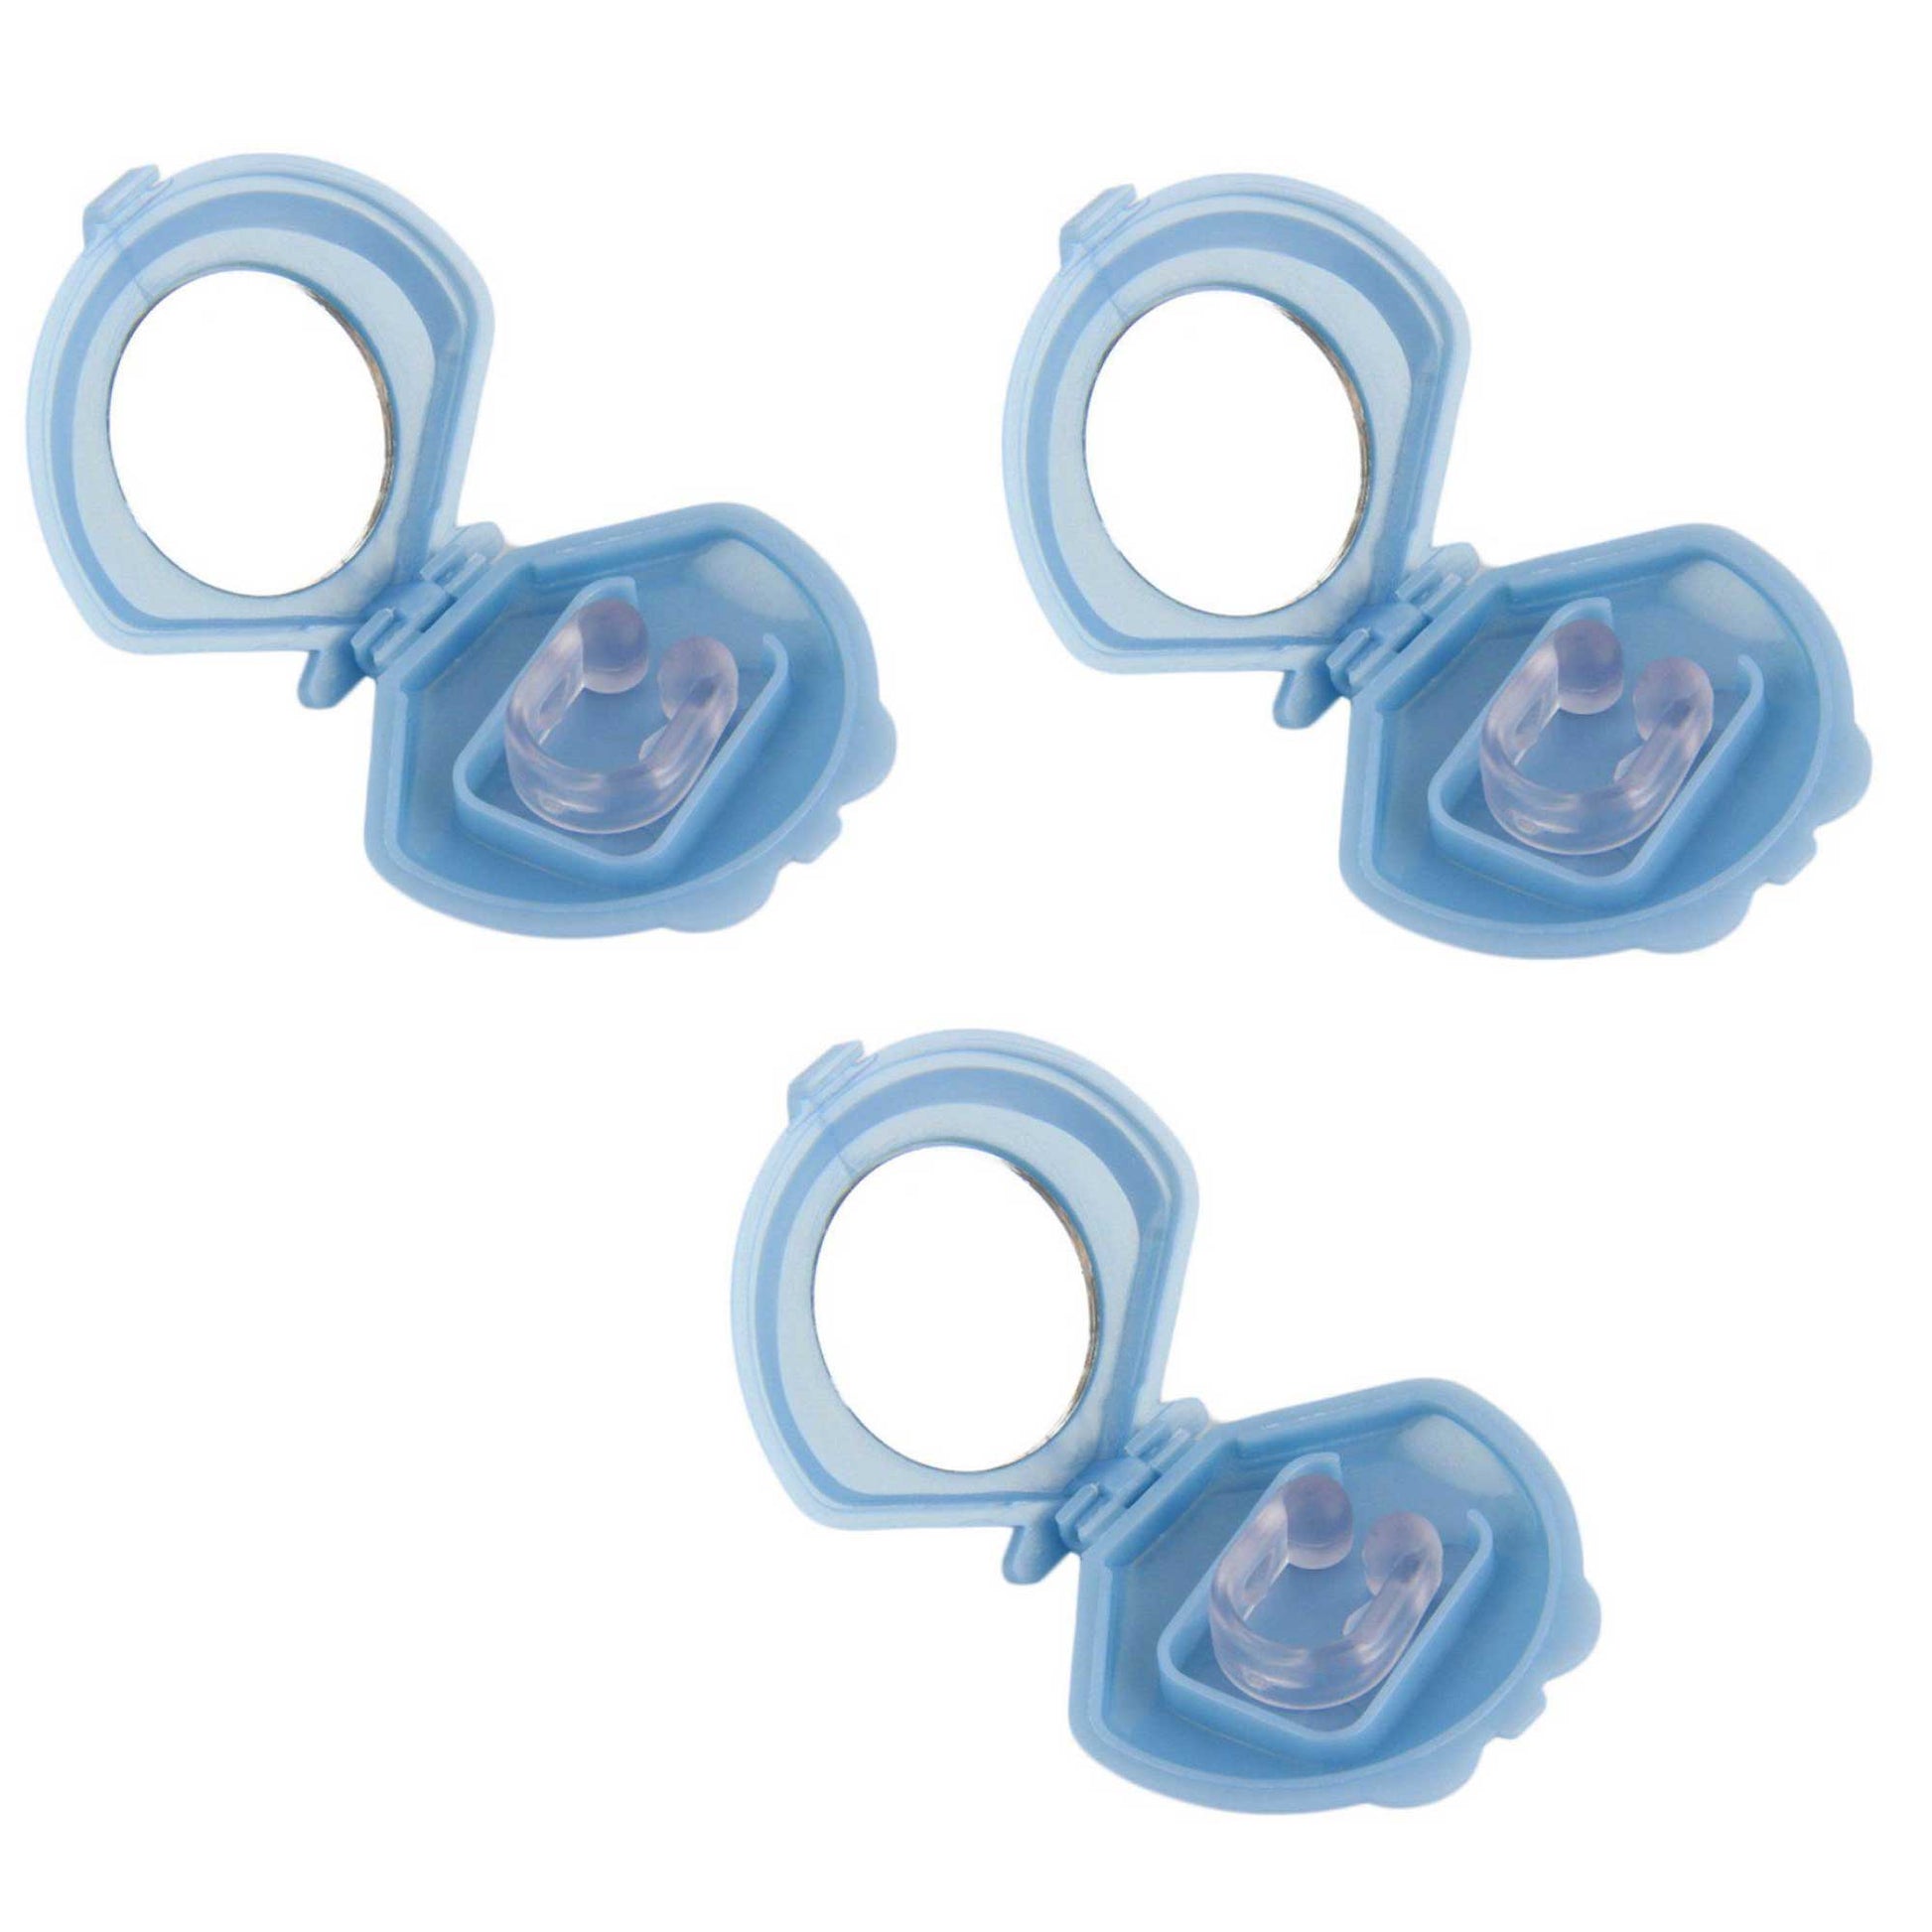 3x Anti Snoring Aid Nose Clips - Silicone Sleeping and Breathing Device